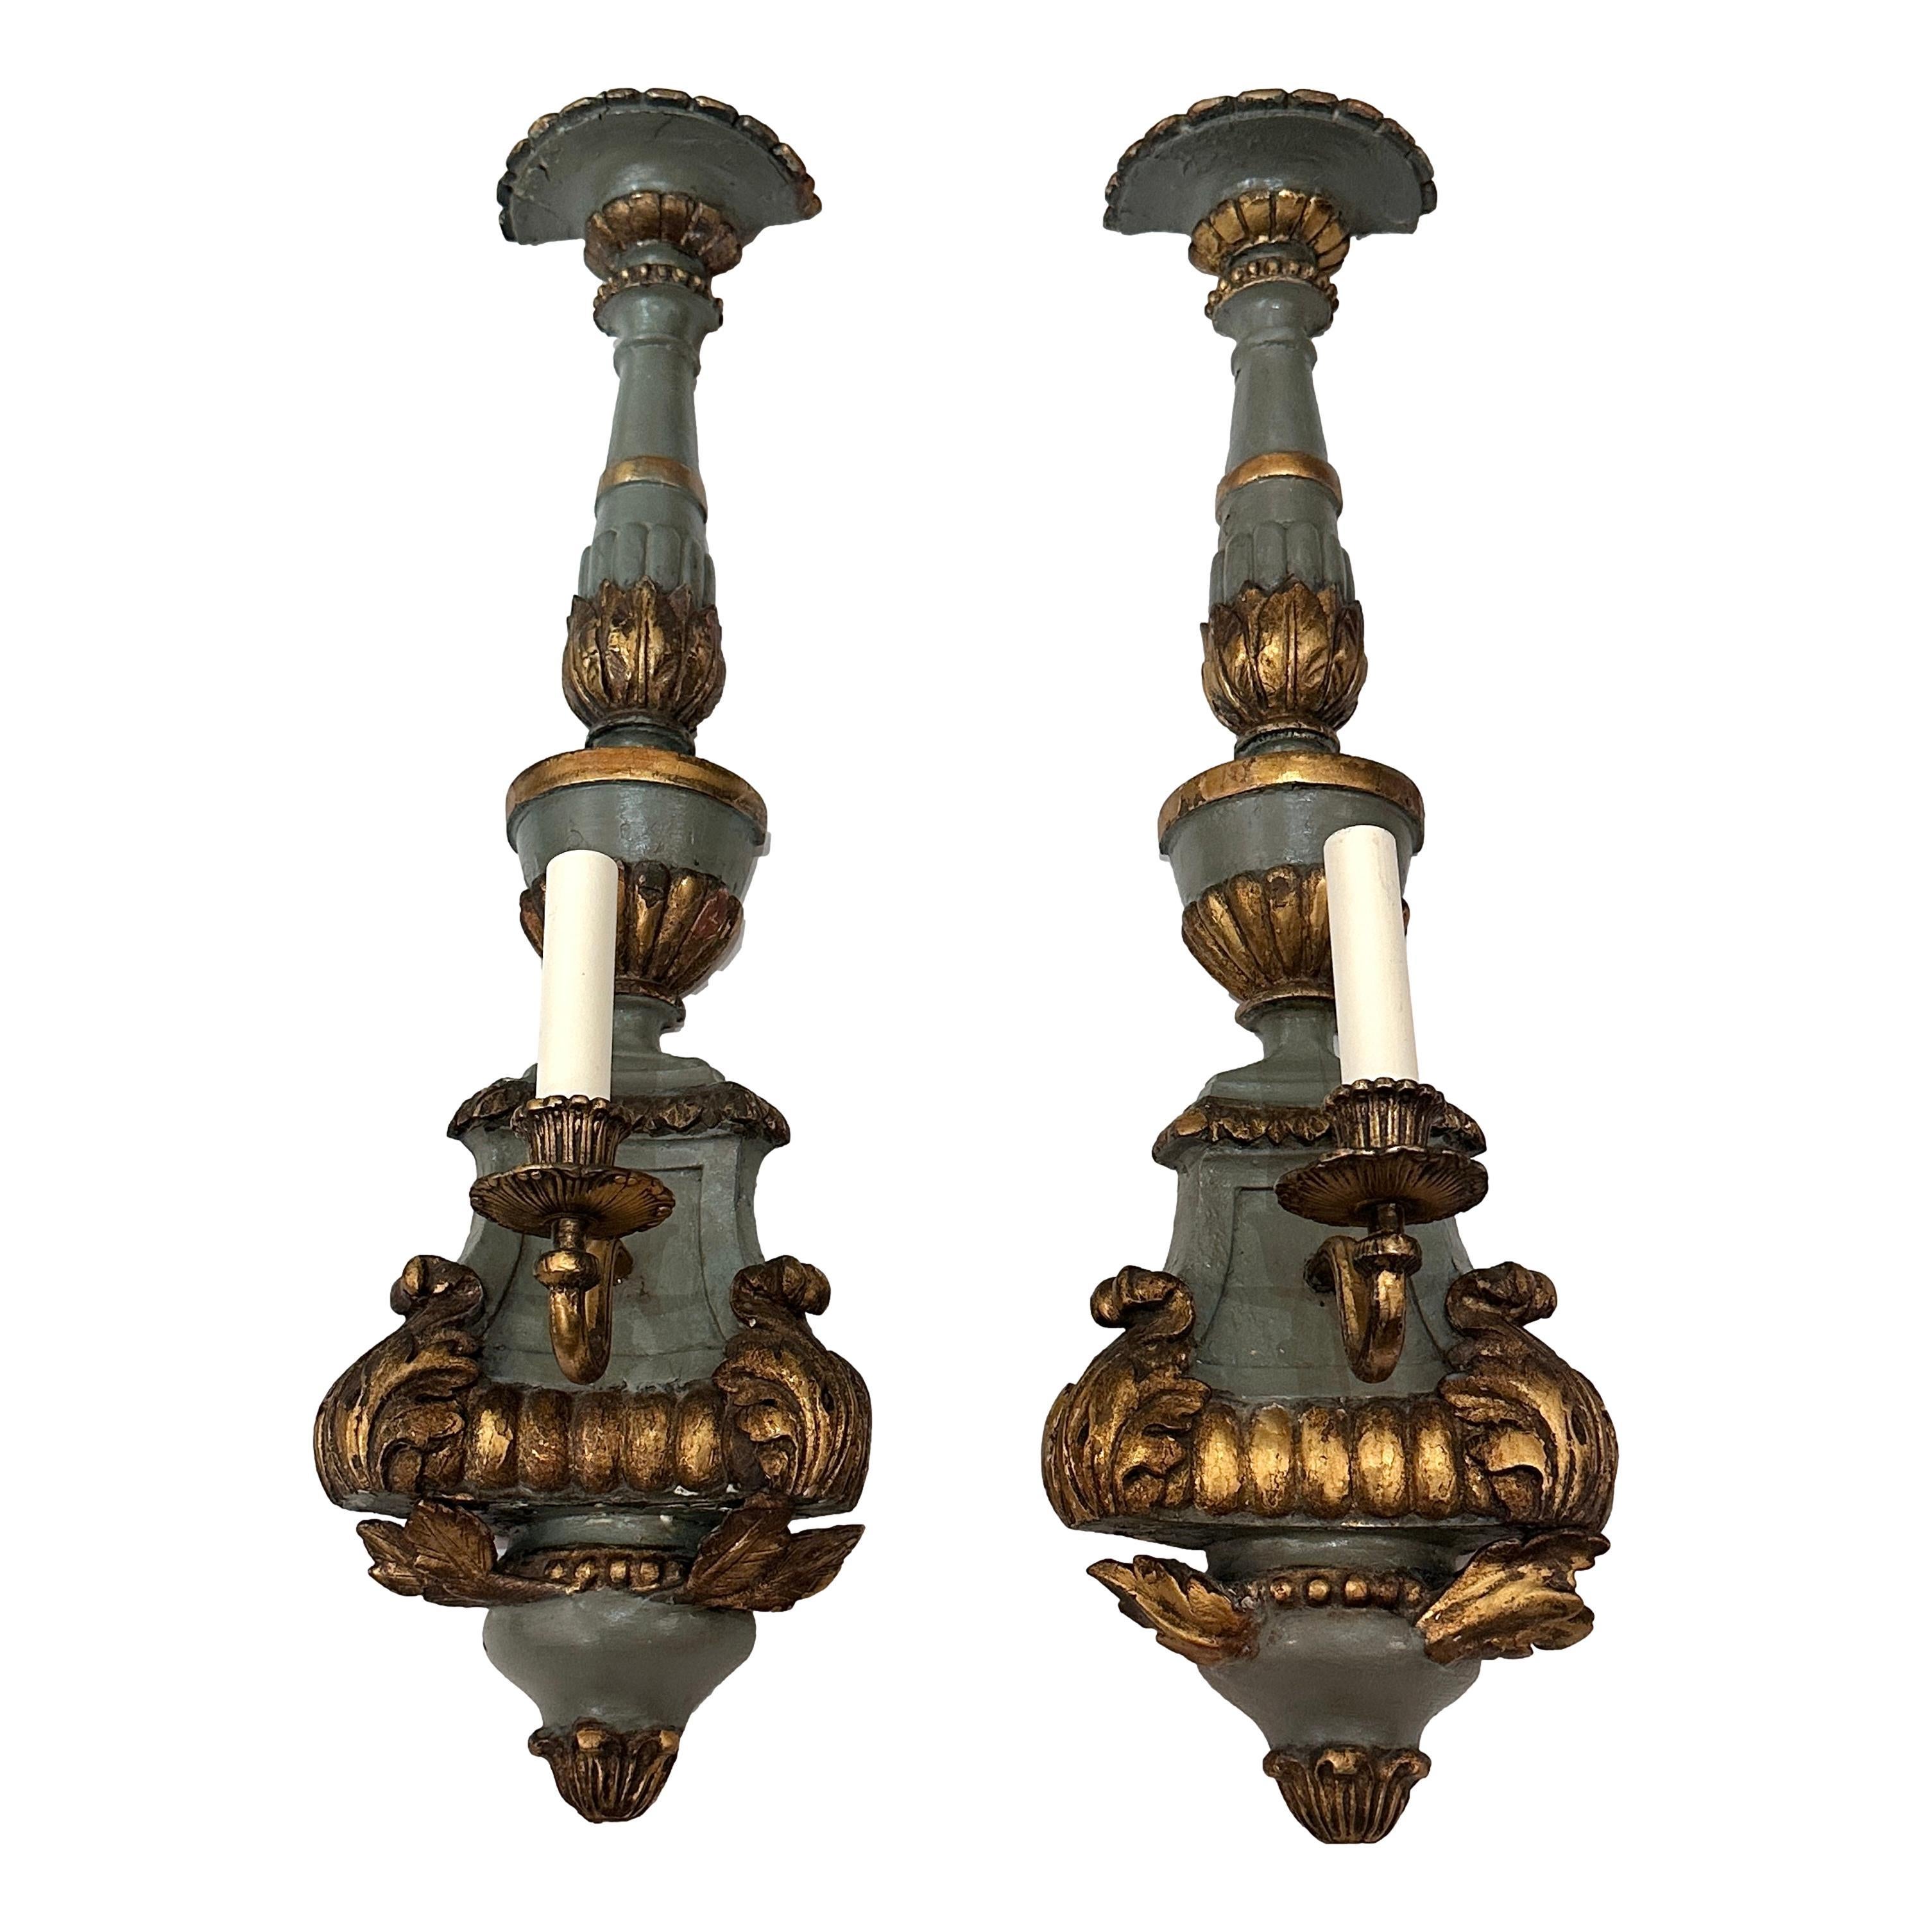 Pair of large single-light carved wood 19th Century Venetian sconces with original painted finish and gilt details.

Measurements:
Height: 30